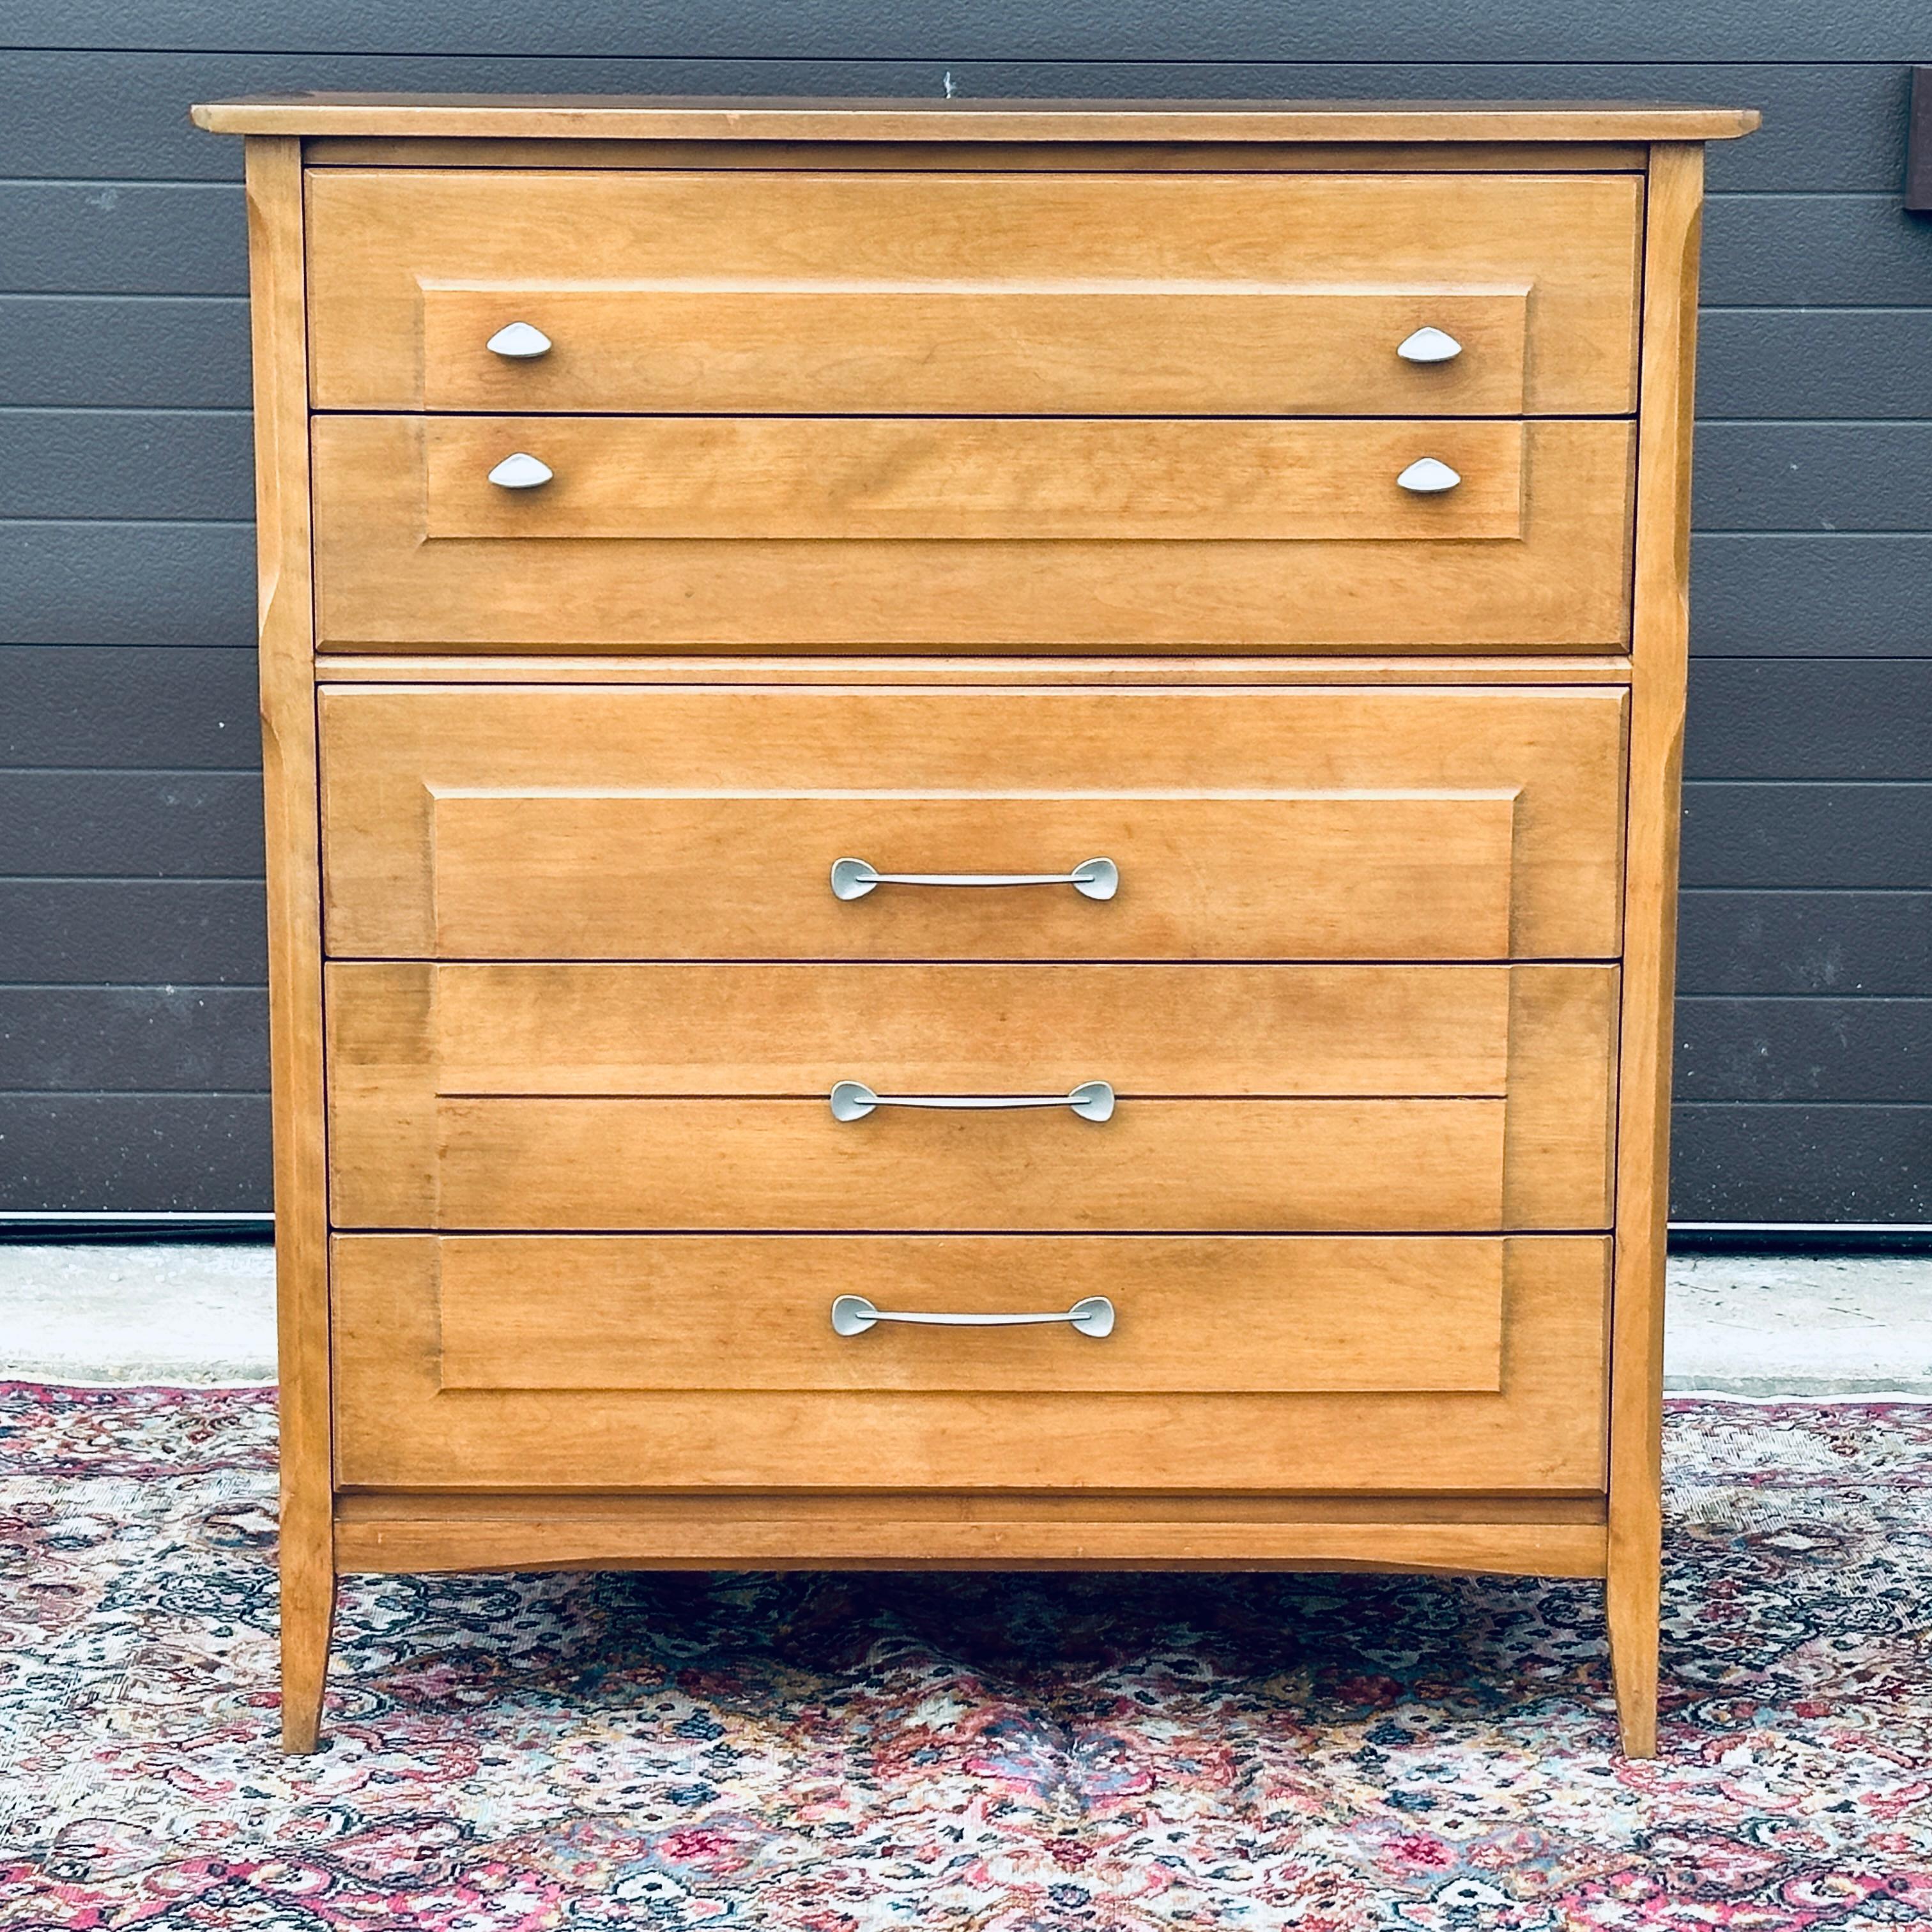 Vintage Heywood Wakefield model M1962 tall chest in original Topaz finish featuring solid birch construction and five dovetailed drawers with modernist hardware. Circa 1960.